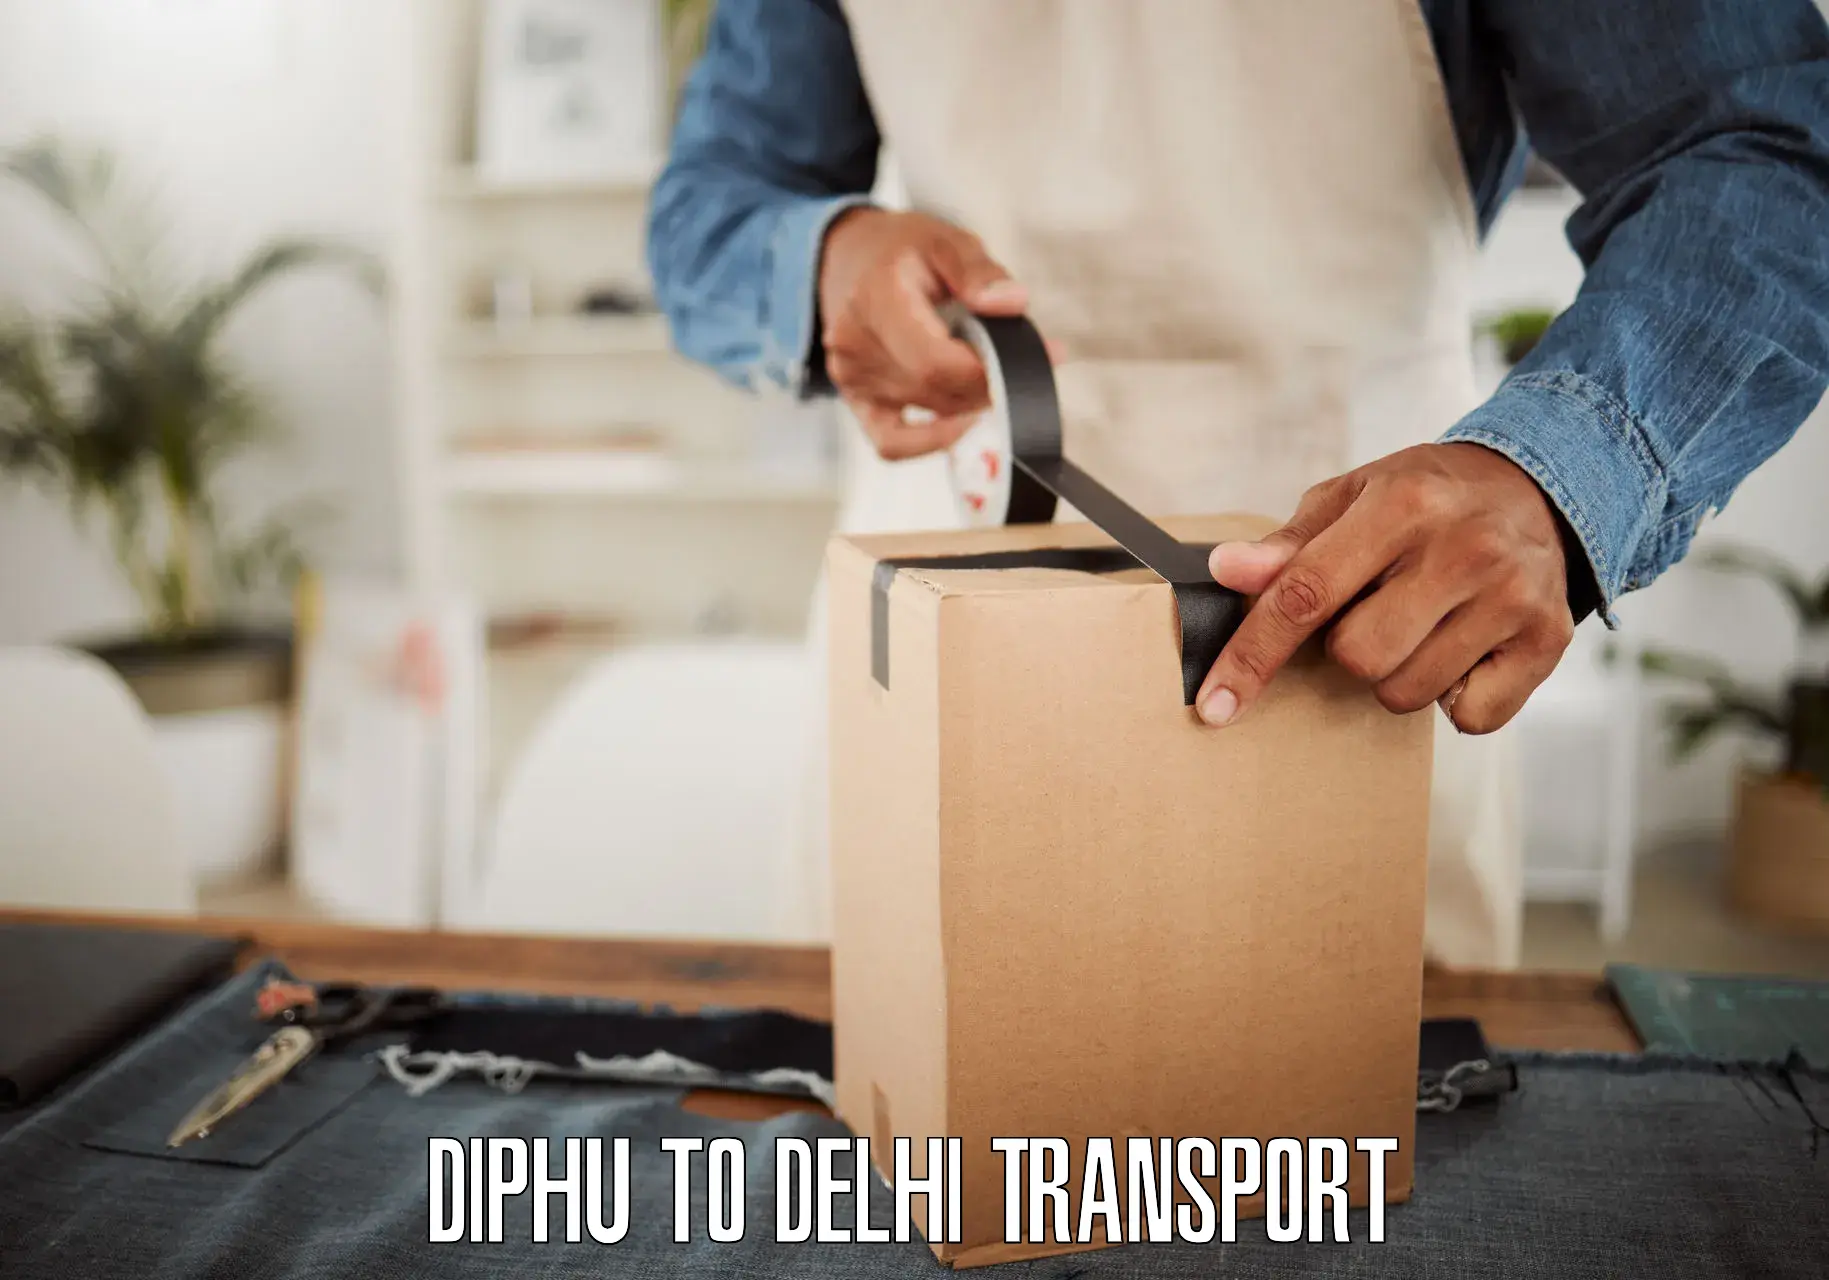 Delivery service Diphu to Delhi